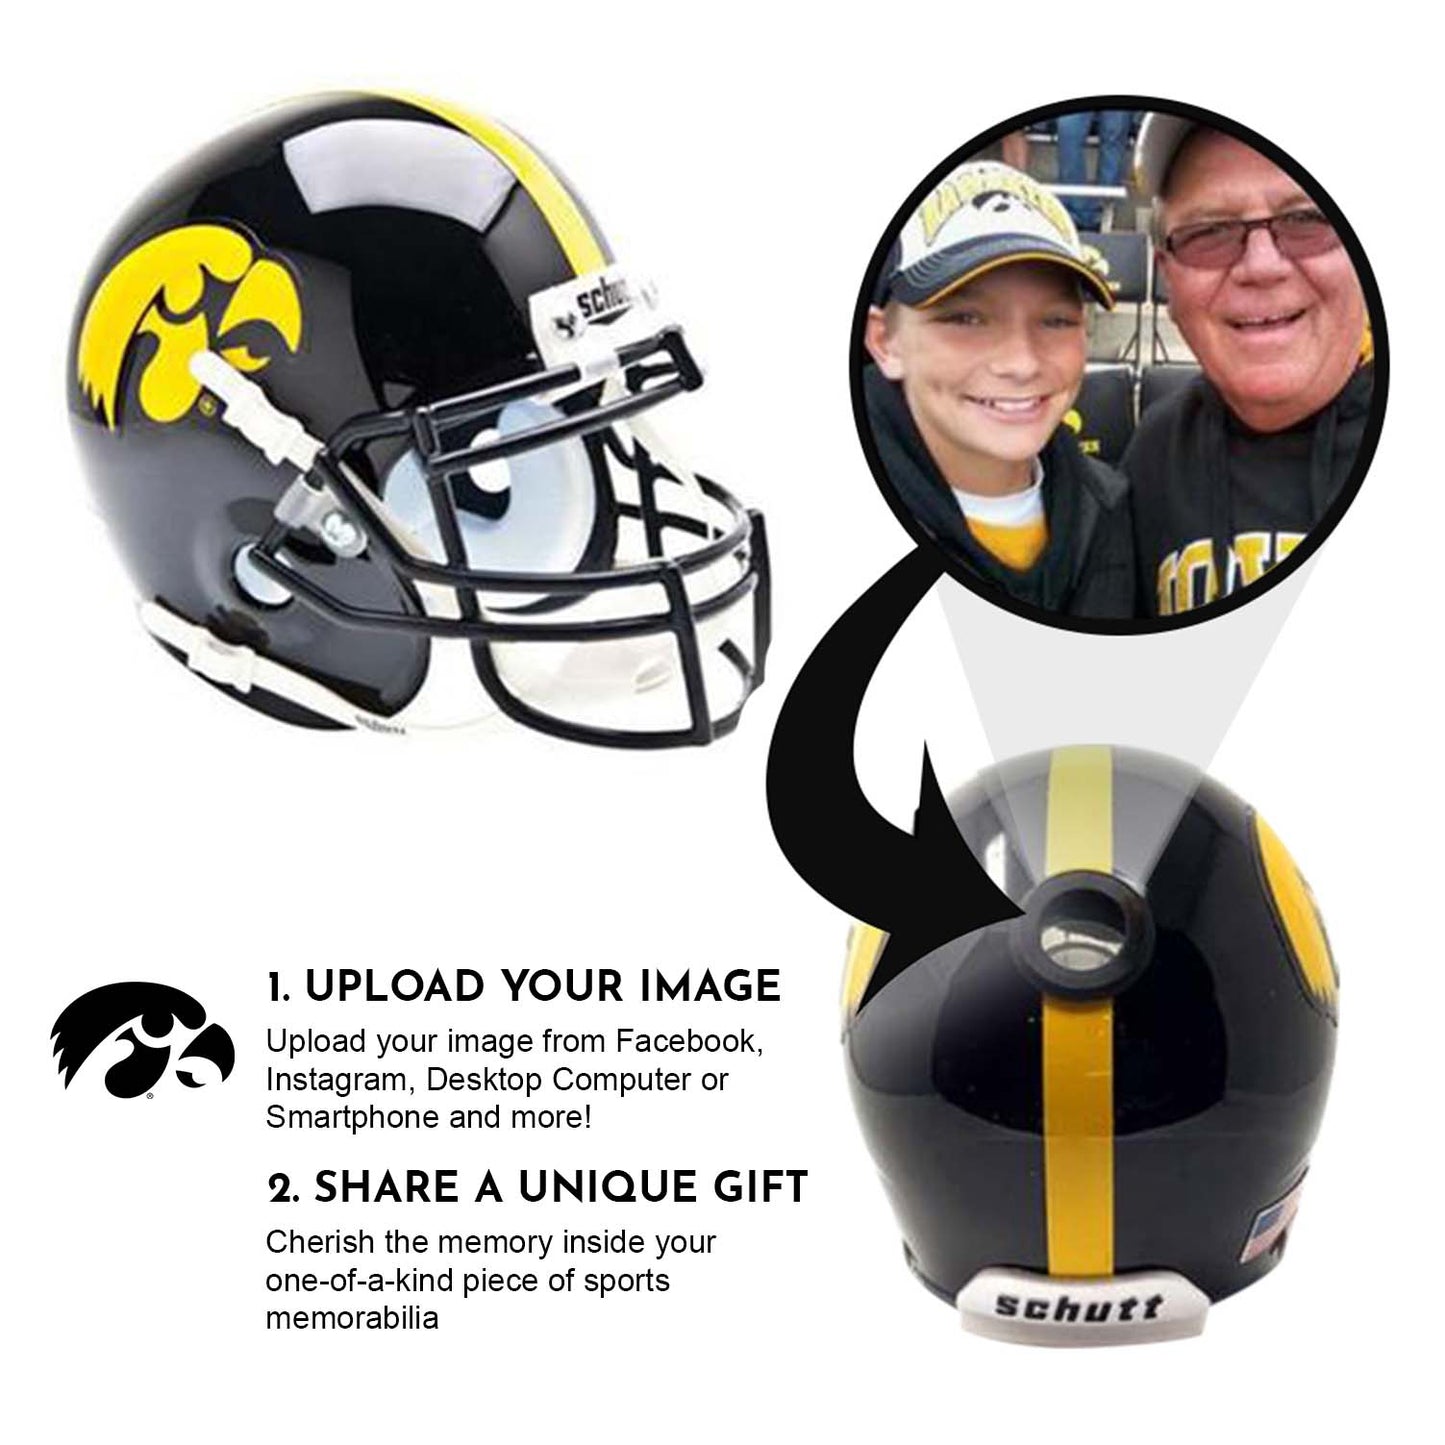 Iowa Hawkeyes College Football Collectible Schutt Mini Helmet - Picture Inside - FANZ Collectibles